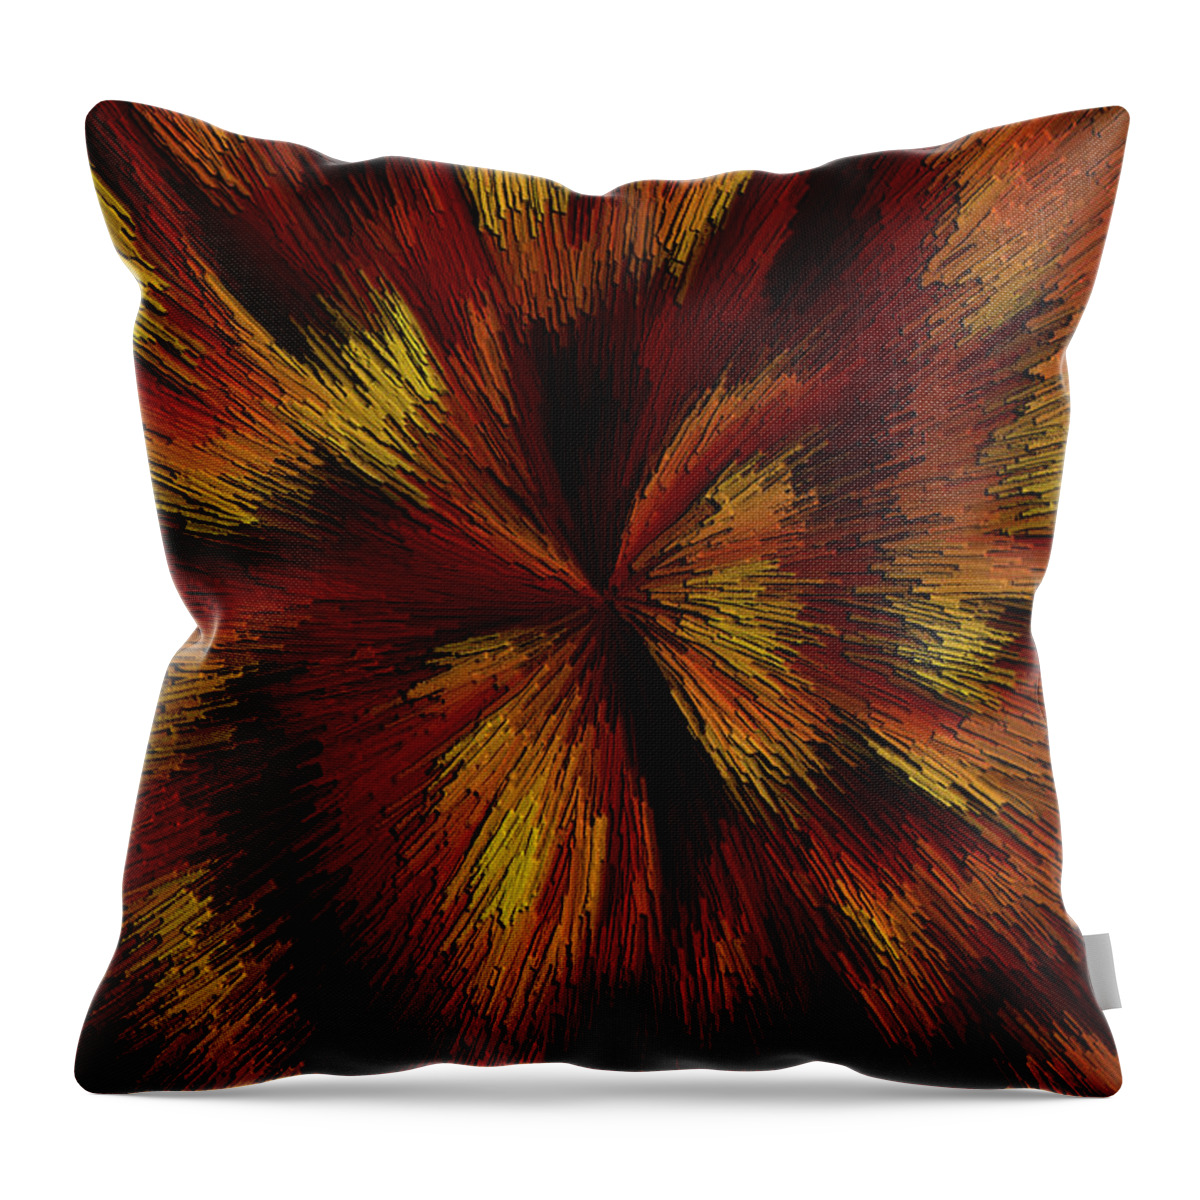 Chaos Throw Pillow featuring the digital art Ahelud by Jeff Iverson